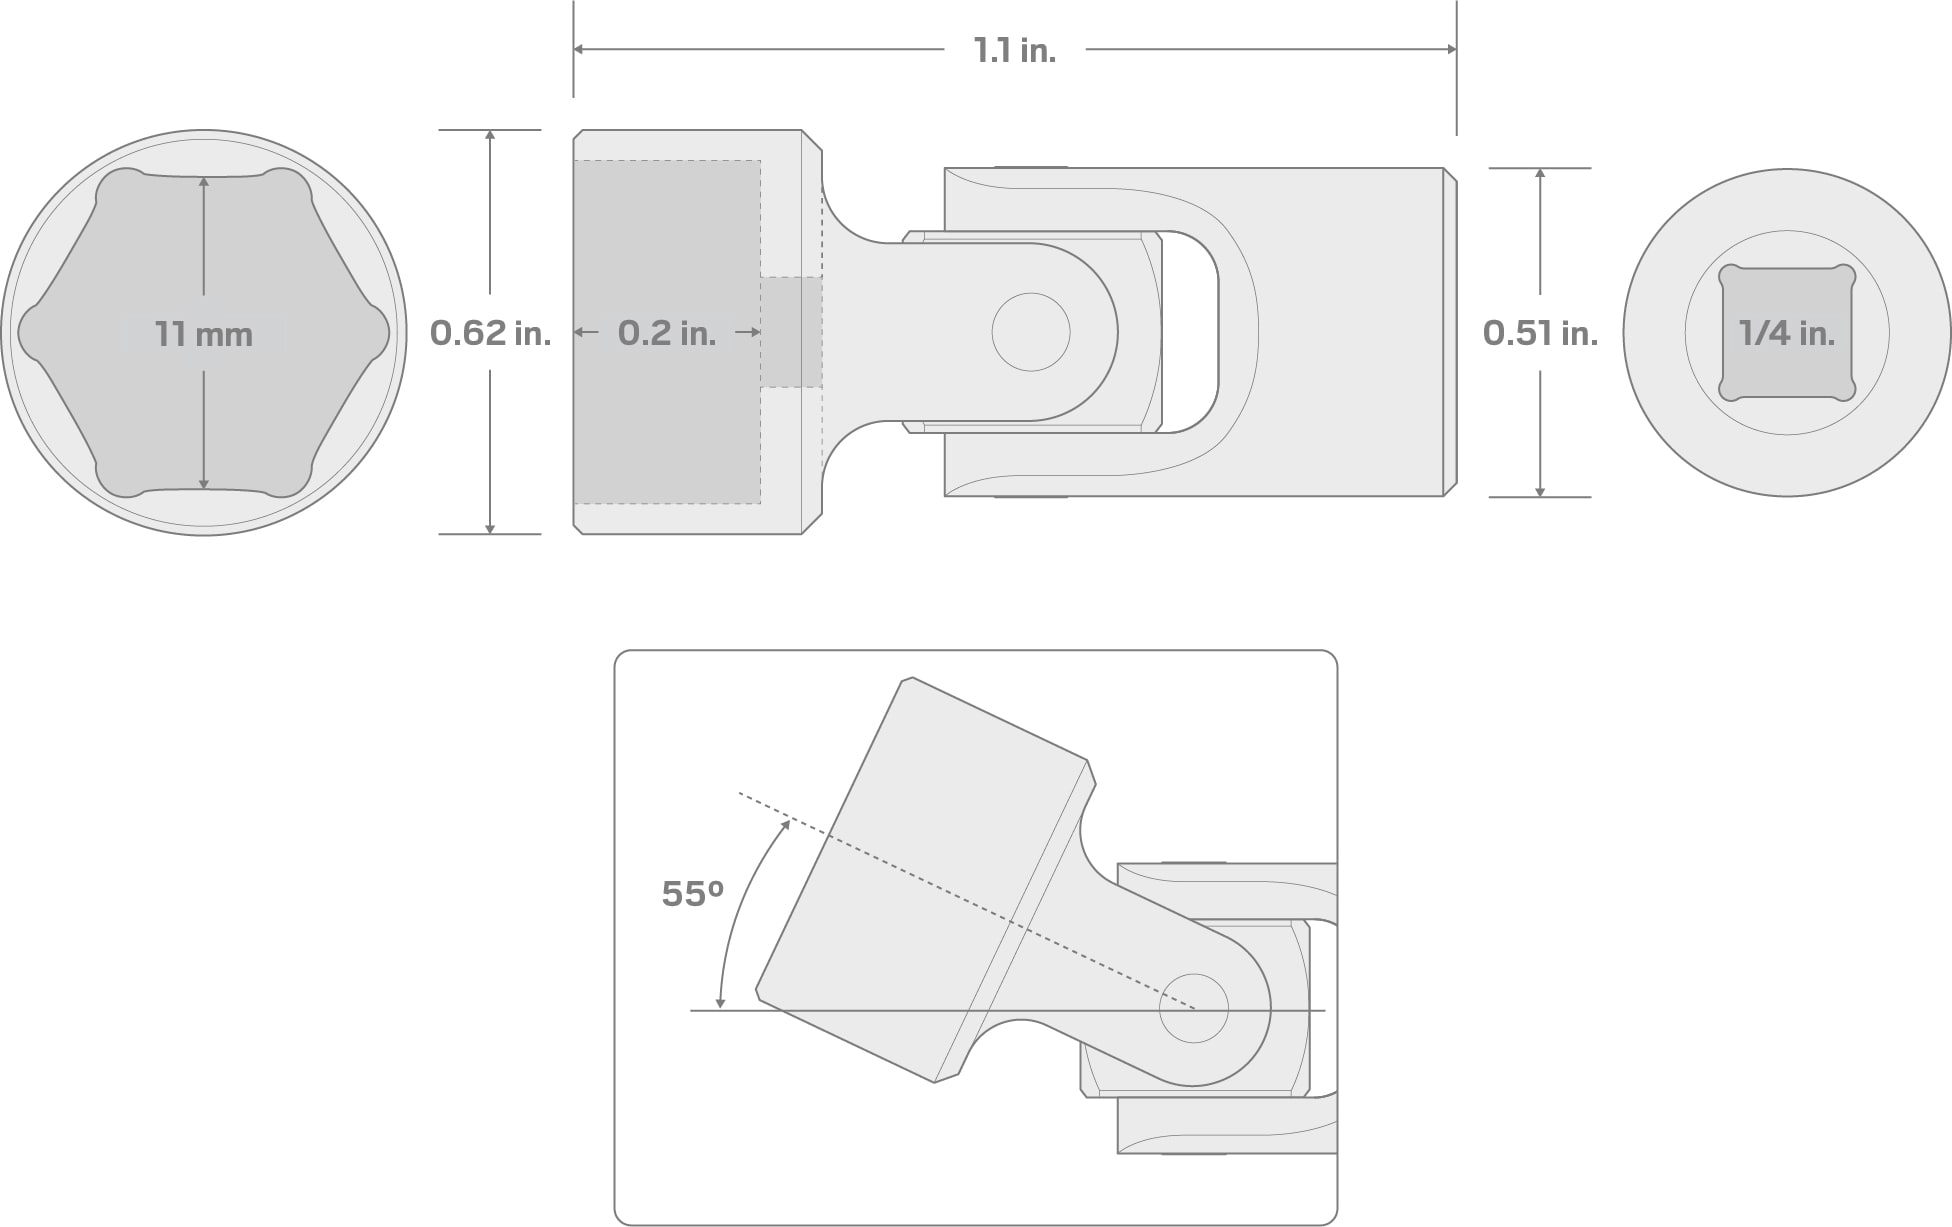 Specs for 1/4 Inch Drive x 11 mm Universal Joint Socket